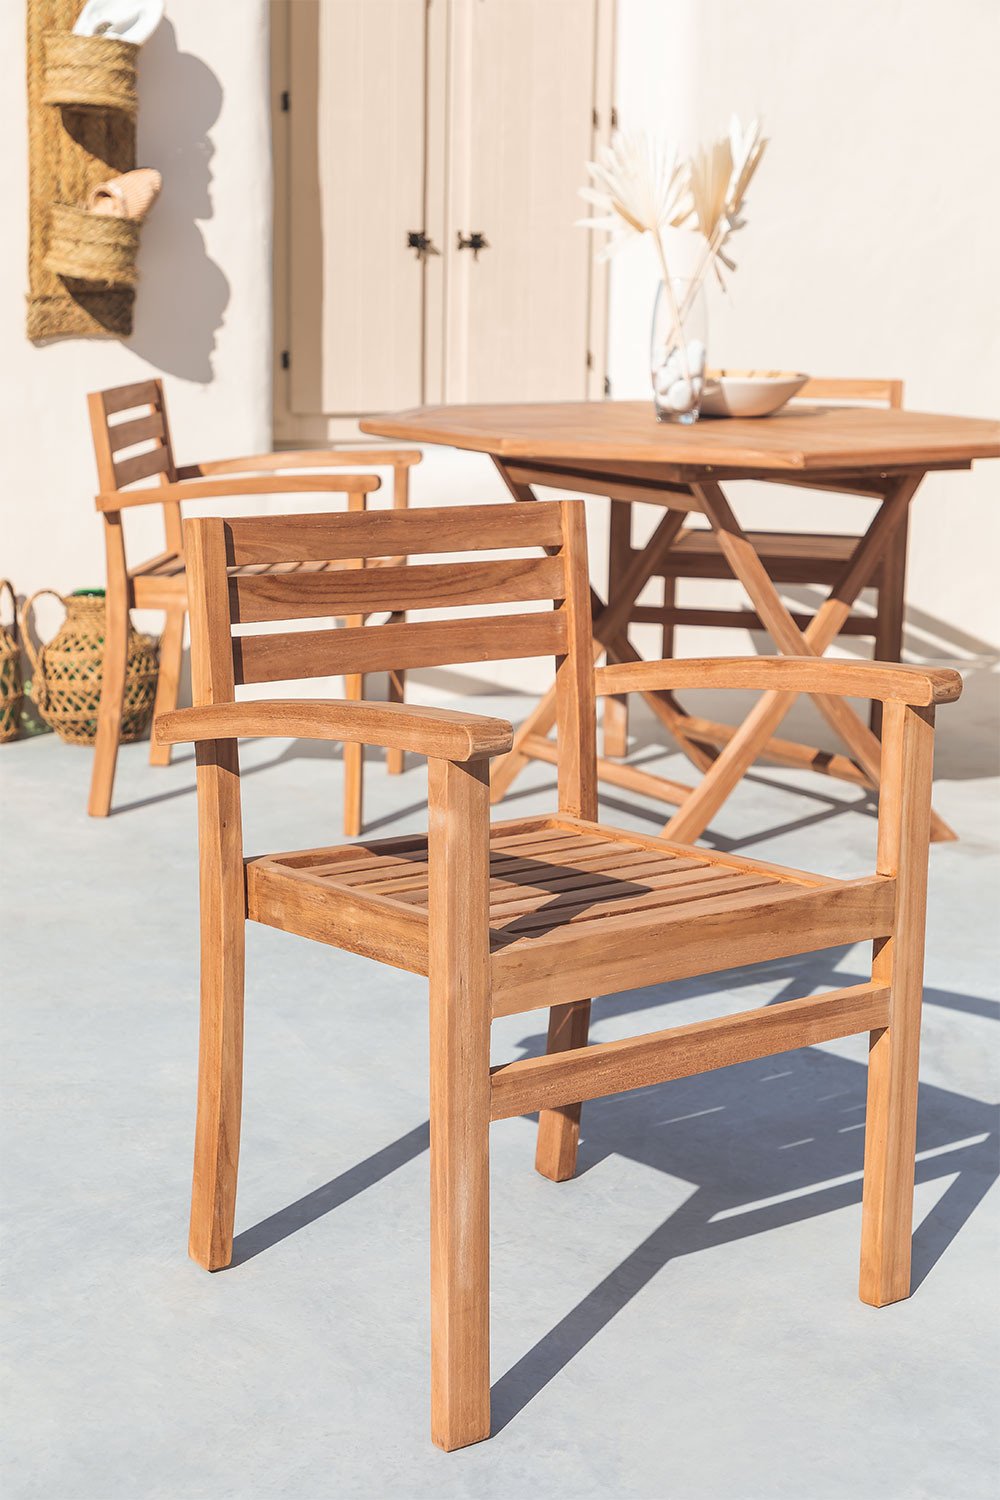 Garden Chair with Arms in Pira Teak Wood, gallery image 1